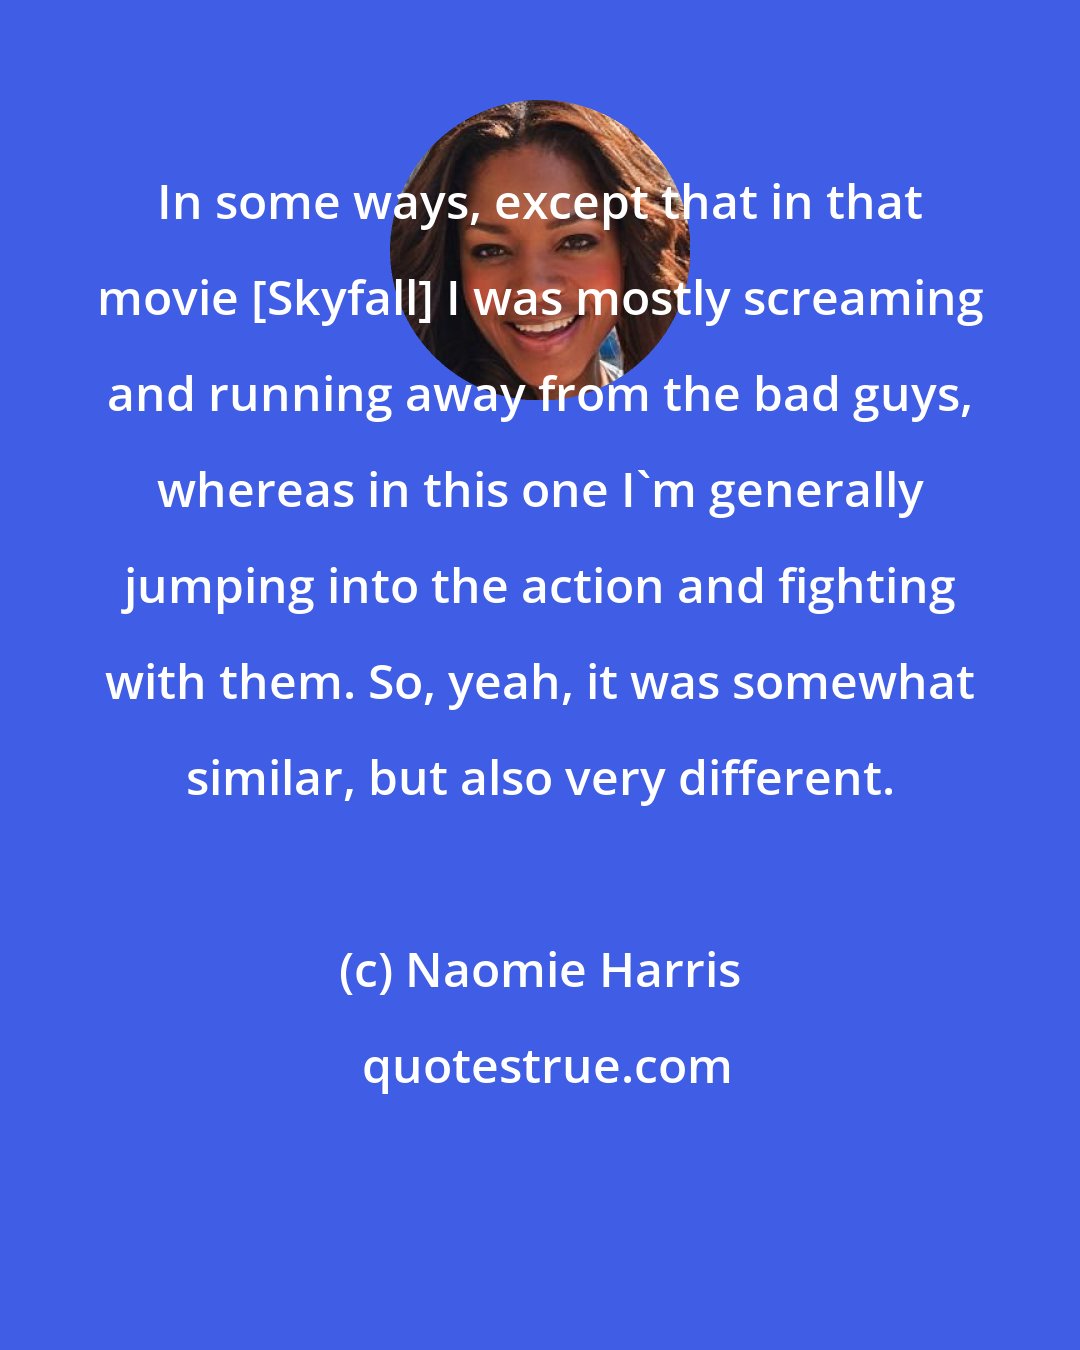 Naomie Harris: In some ways, except that in that movie [Skyfall] I was mostly screaming and running away from the bad guys, whereas in this one I'm generally jumping into the action and fighting with them. So, yeah, it was somewhat similar, but also very different.